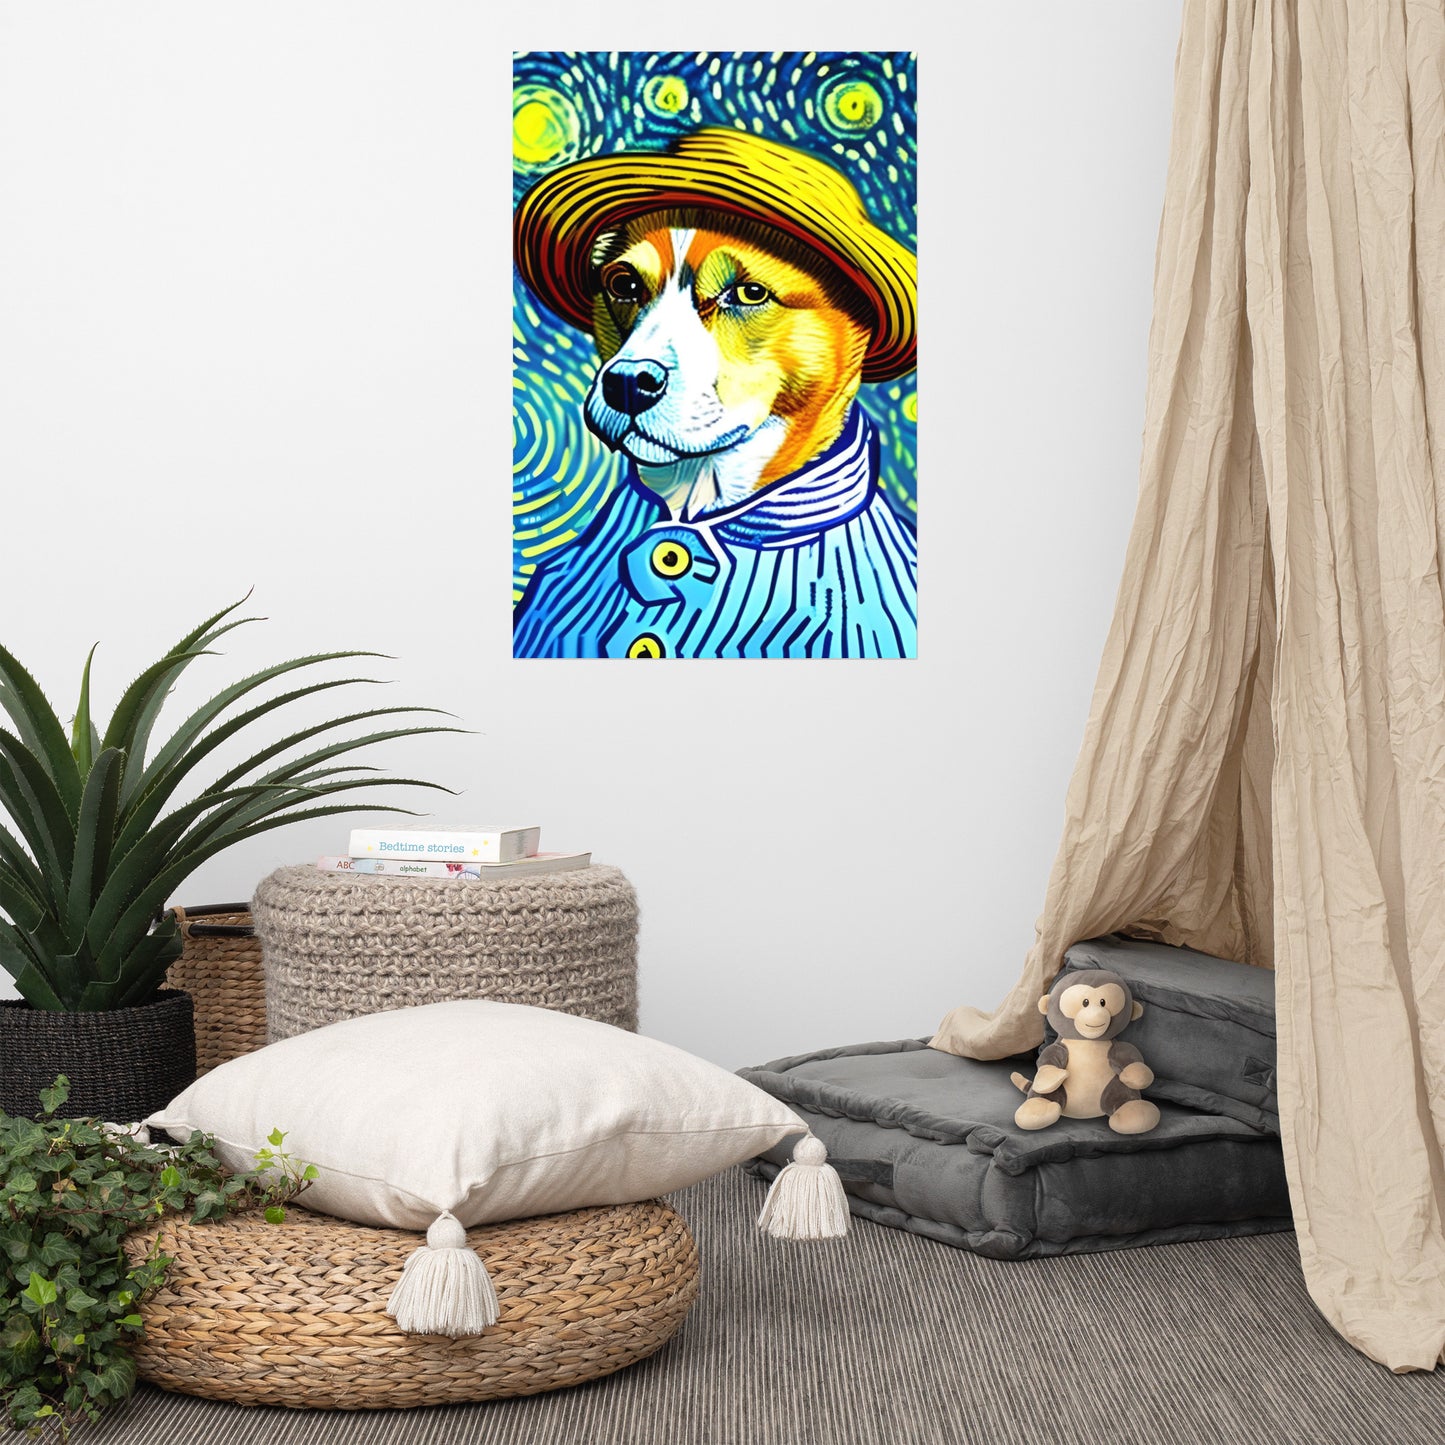 Poster Van Gogh background and Cool Dog lover design